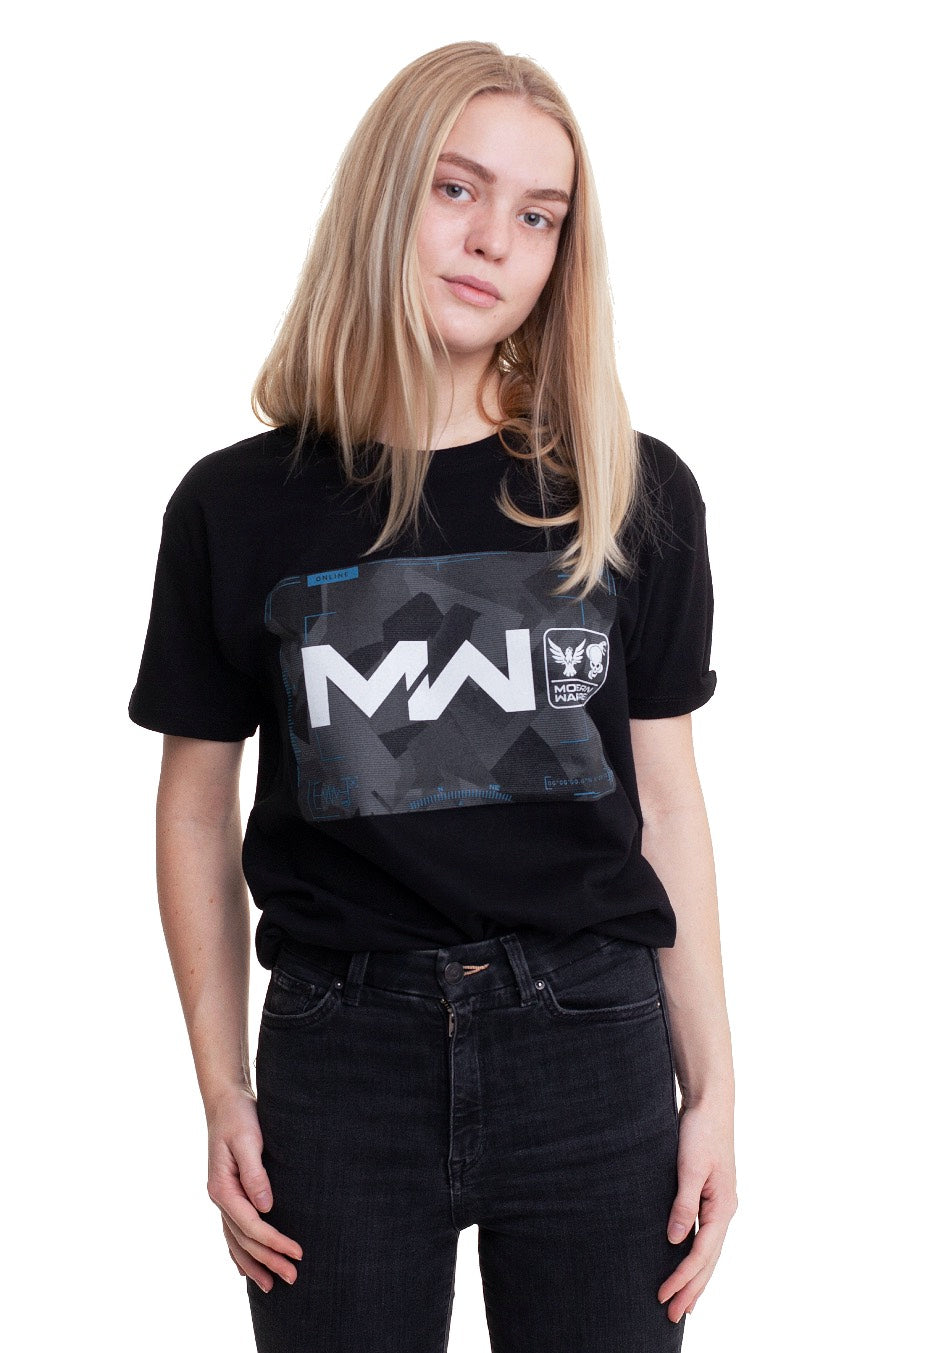 Call of Duty - Multiplayer Composition - T-Shirt | Women-Image